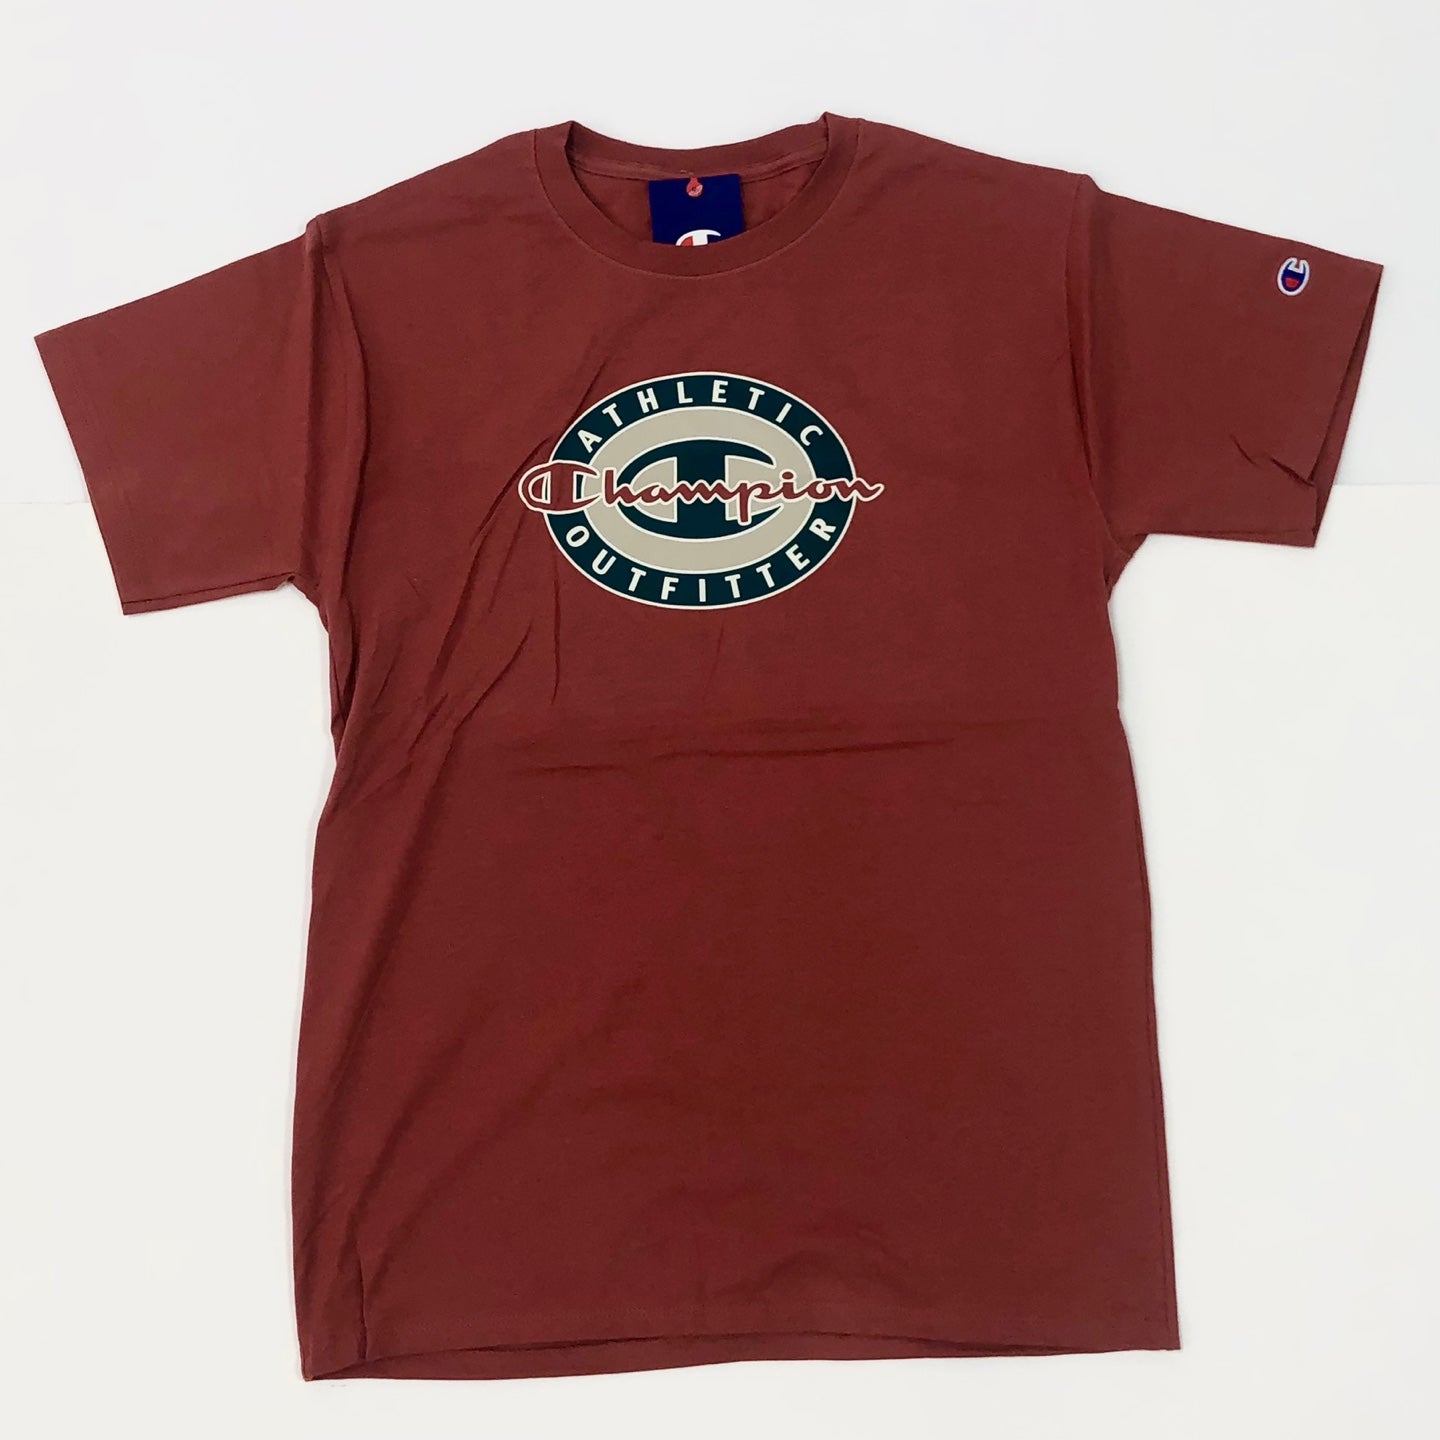 CHAMPION Athletic Outfitter Graphic T-shirt